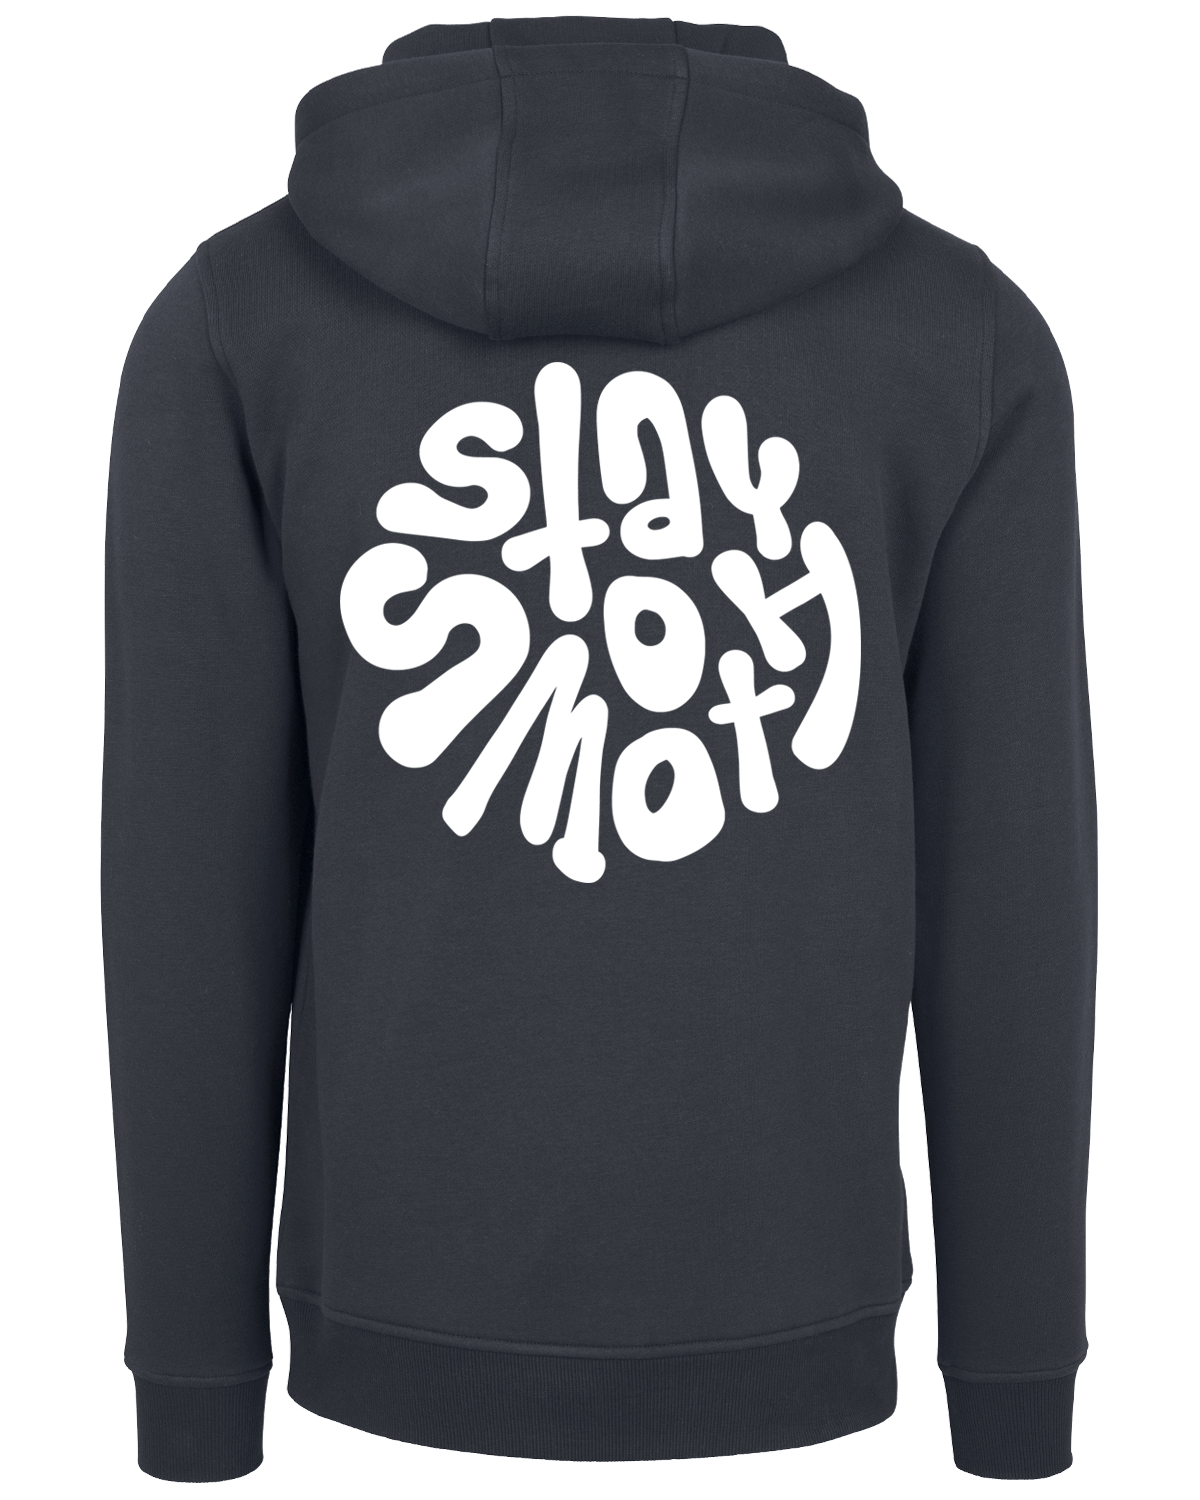 Ink Blue Hoodie / Stay Smooth White Front+Back Men